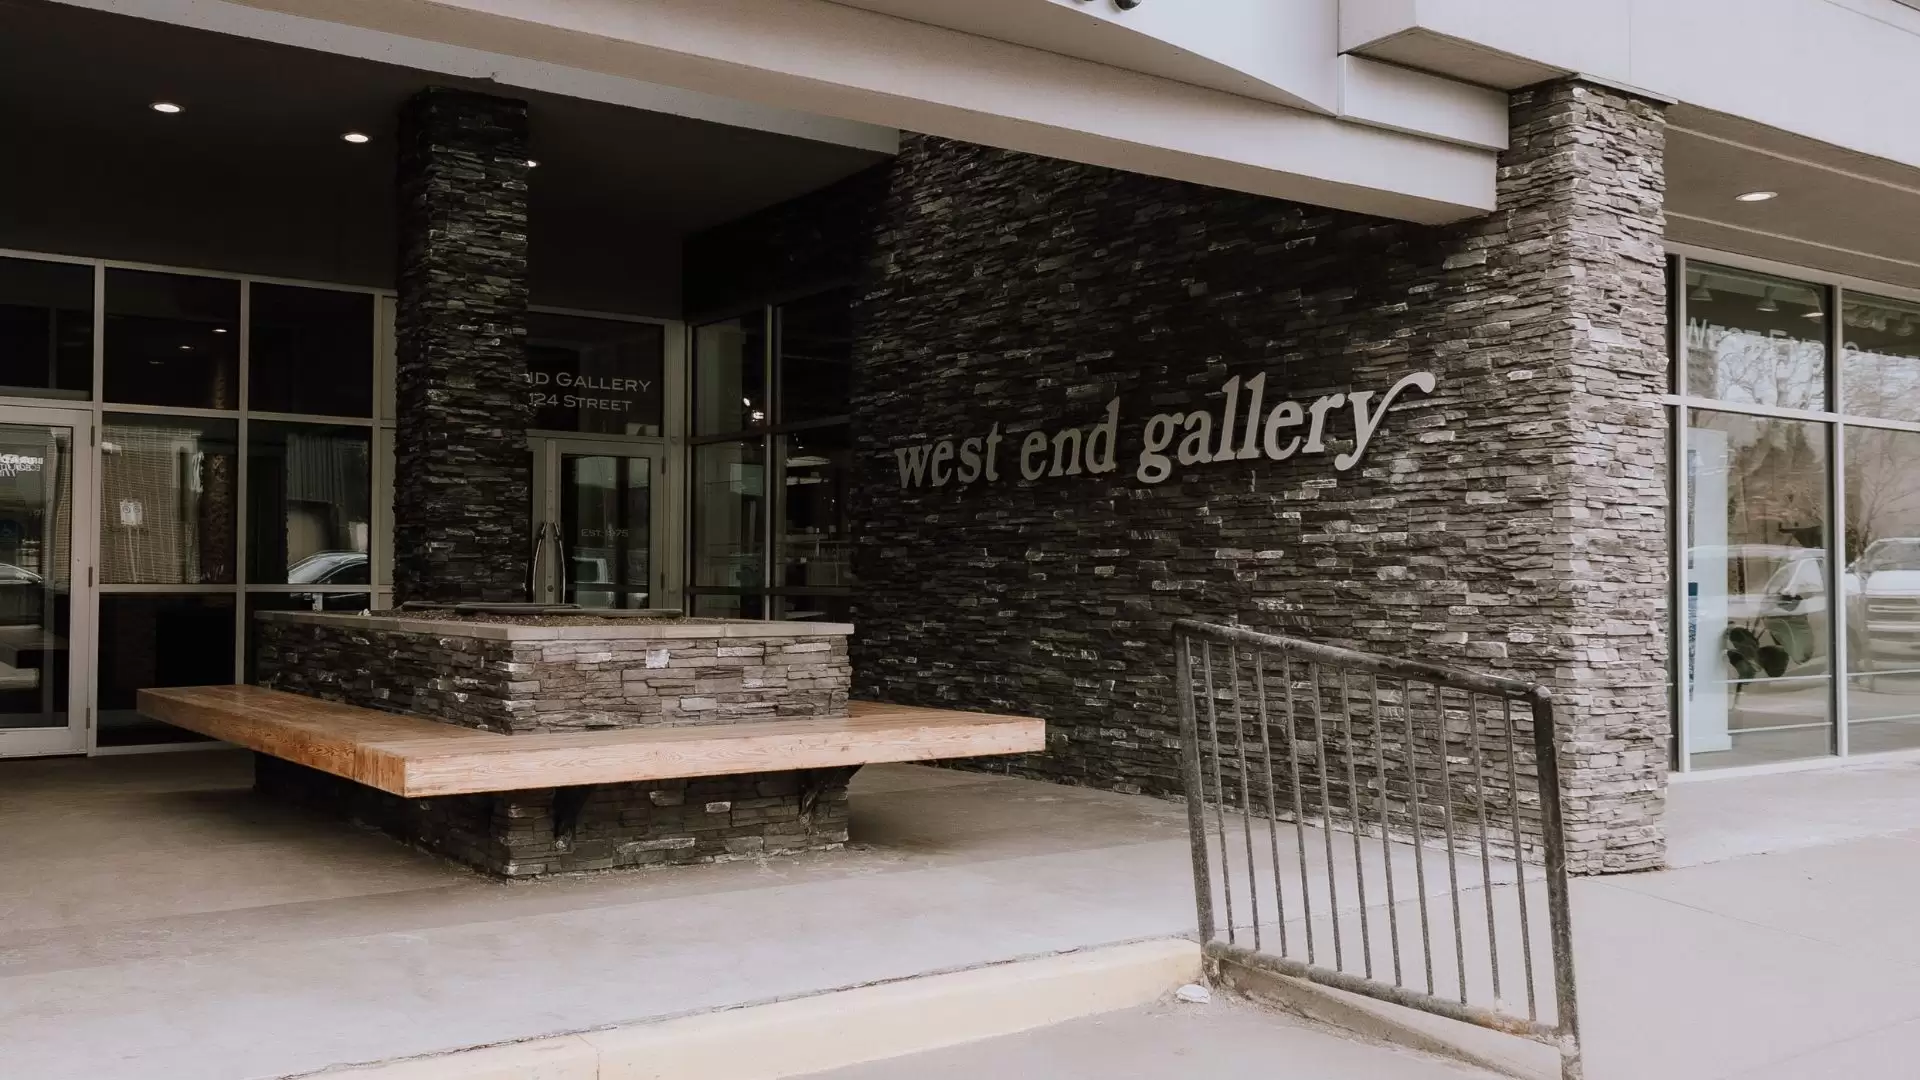 Princeton Place entrance with ramp and handrail. Wooden bench is in front of the glass doors and "West End Gallery" sign is on the brick wall.